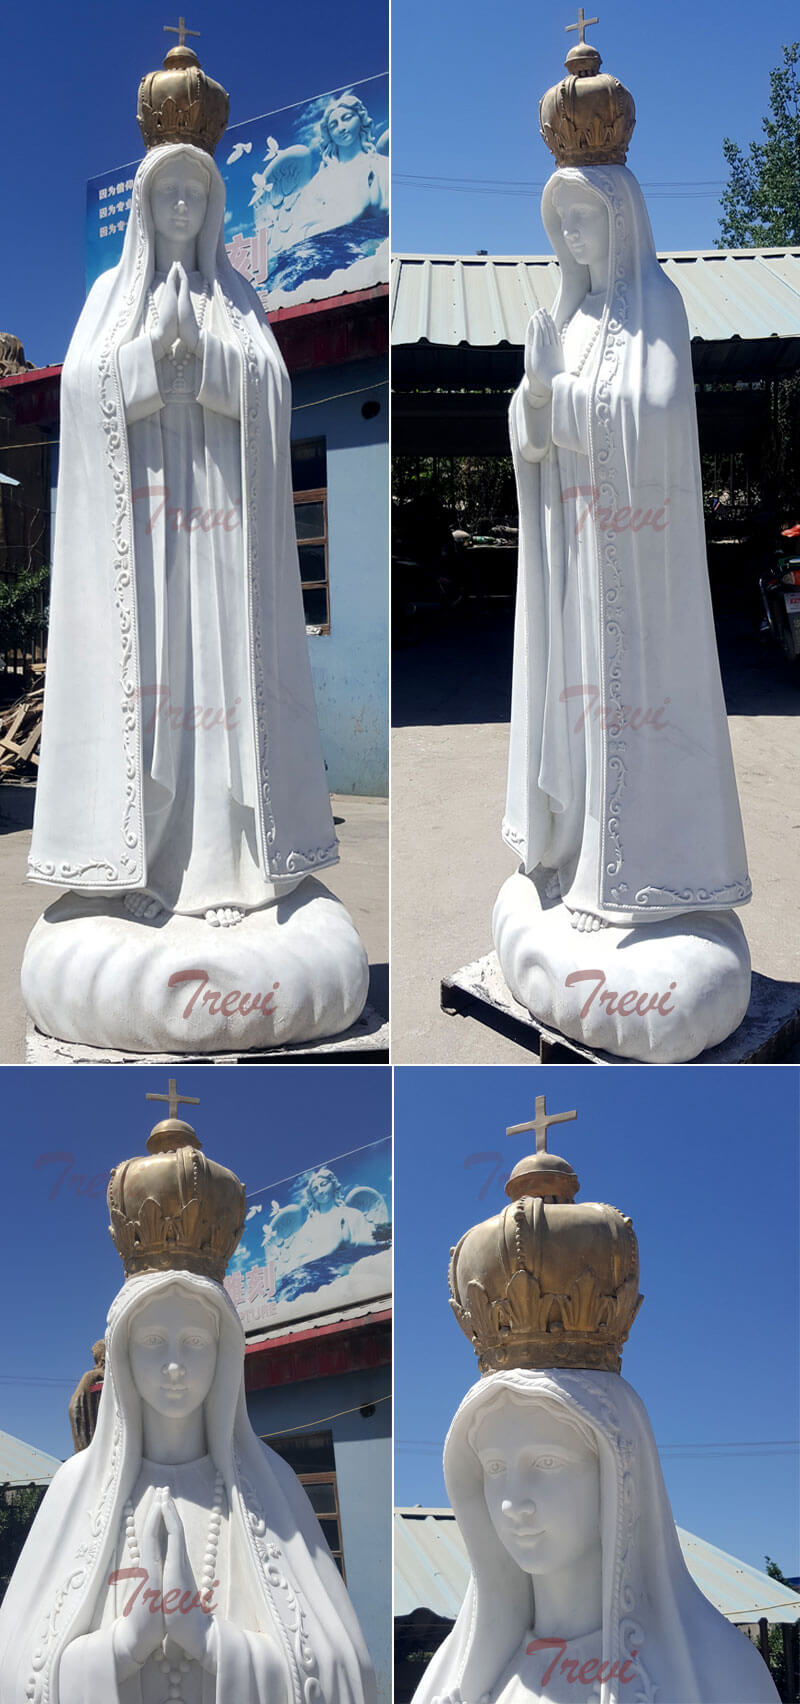 Catholic marble outdoor statues lady of fatima portugal with crown designs